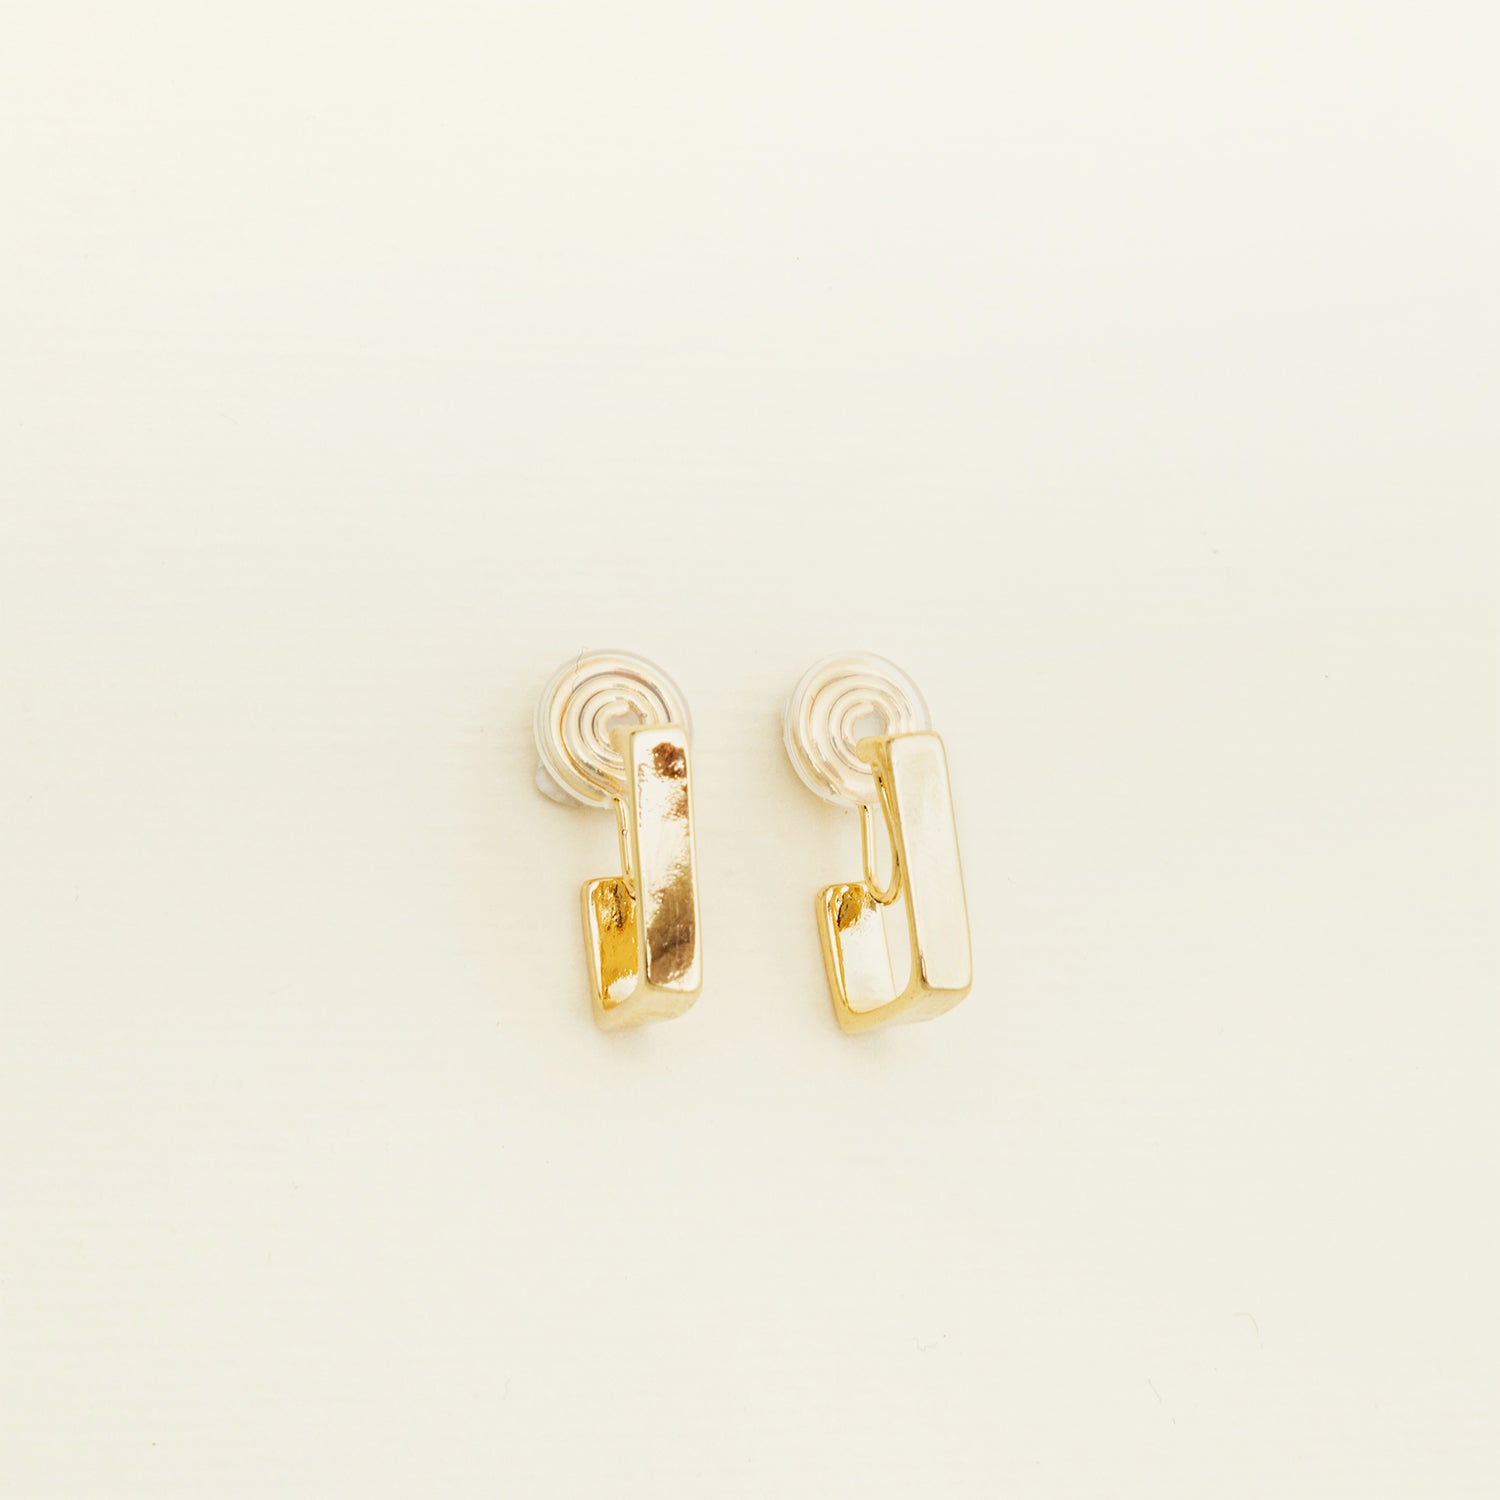 Catalogue image of a Classic Square Huggie Hoop Clip-On Earrings - 14k Gold plated metal alloy, non-tarnish, and water-resistant. Modern square clip-on design with mosquito coil closure and paddings for a secure, comfortable fit all day.